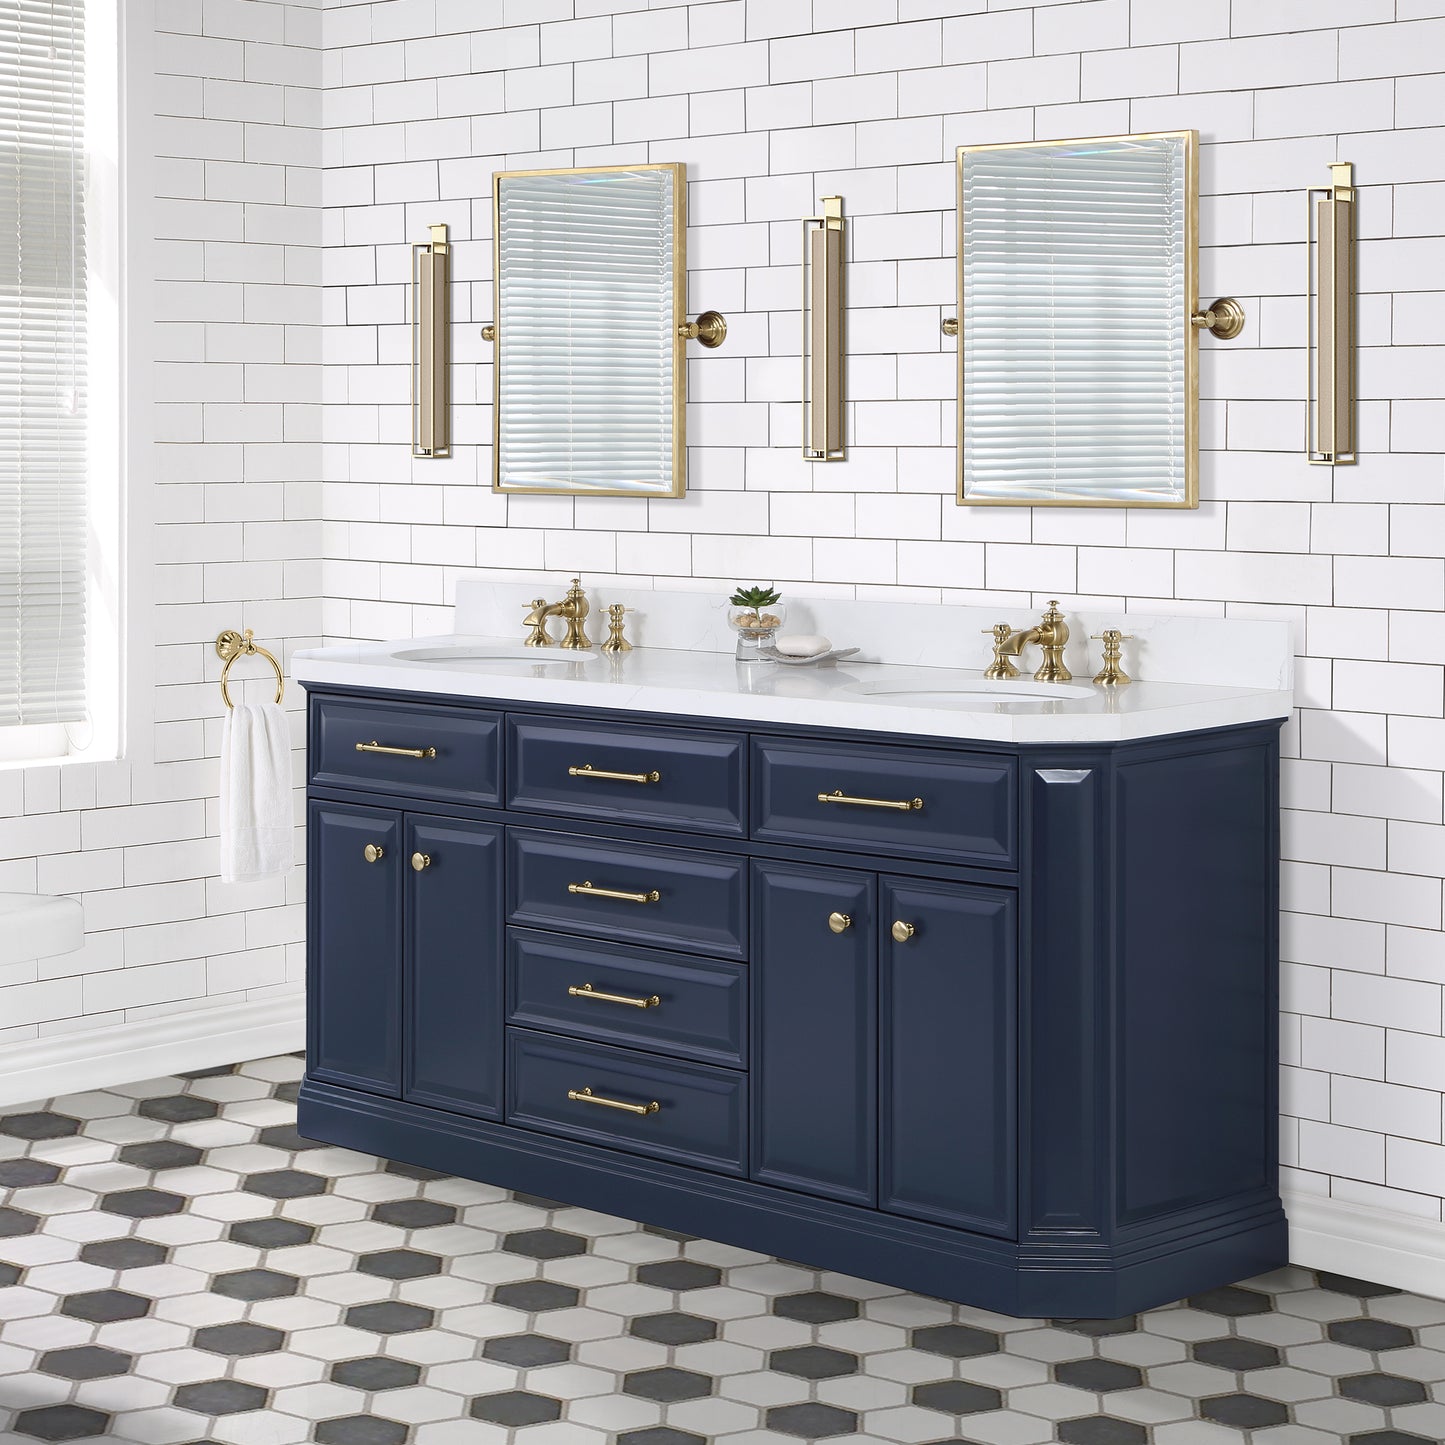 Water Creation Palace 72" Inch Double Sink White Quartz Countertop Vanity in Monarch Blue with Waterfall Faucets - Luxe Bathroom Vanities